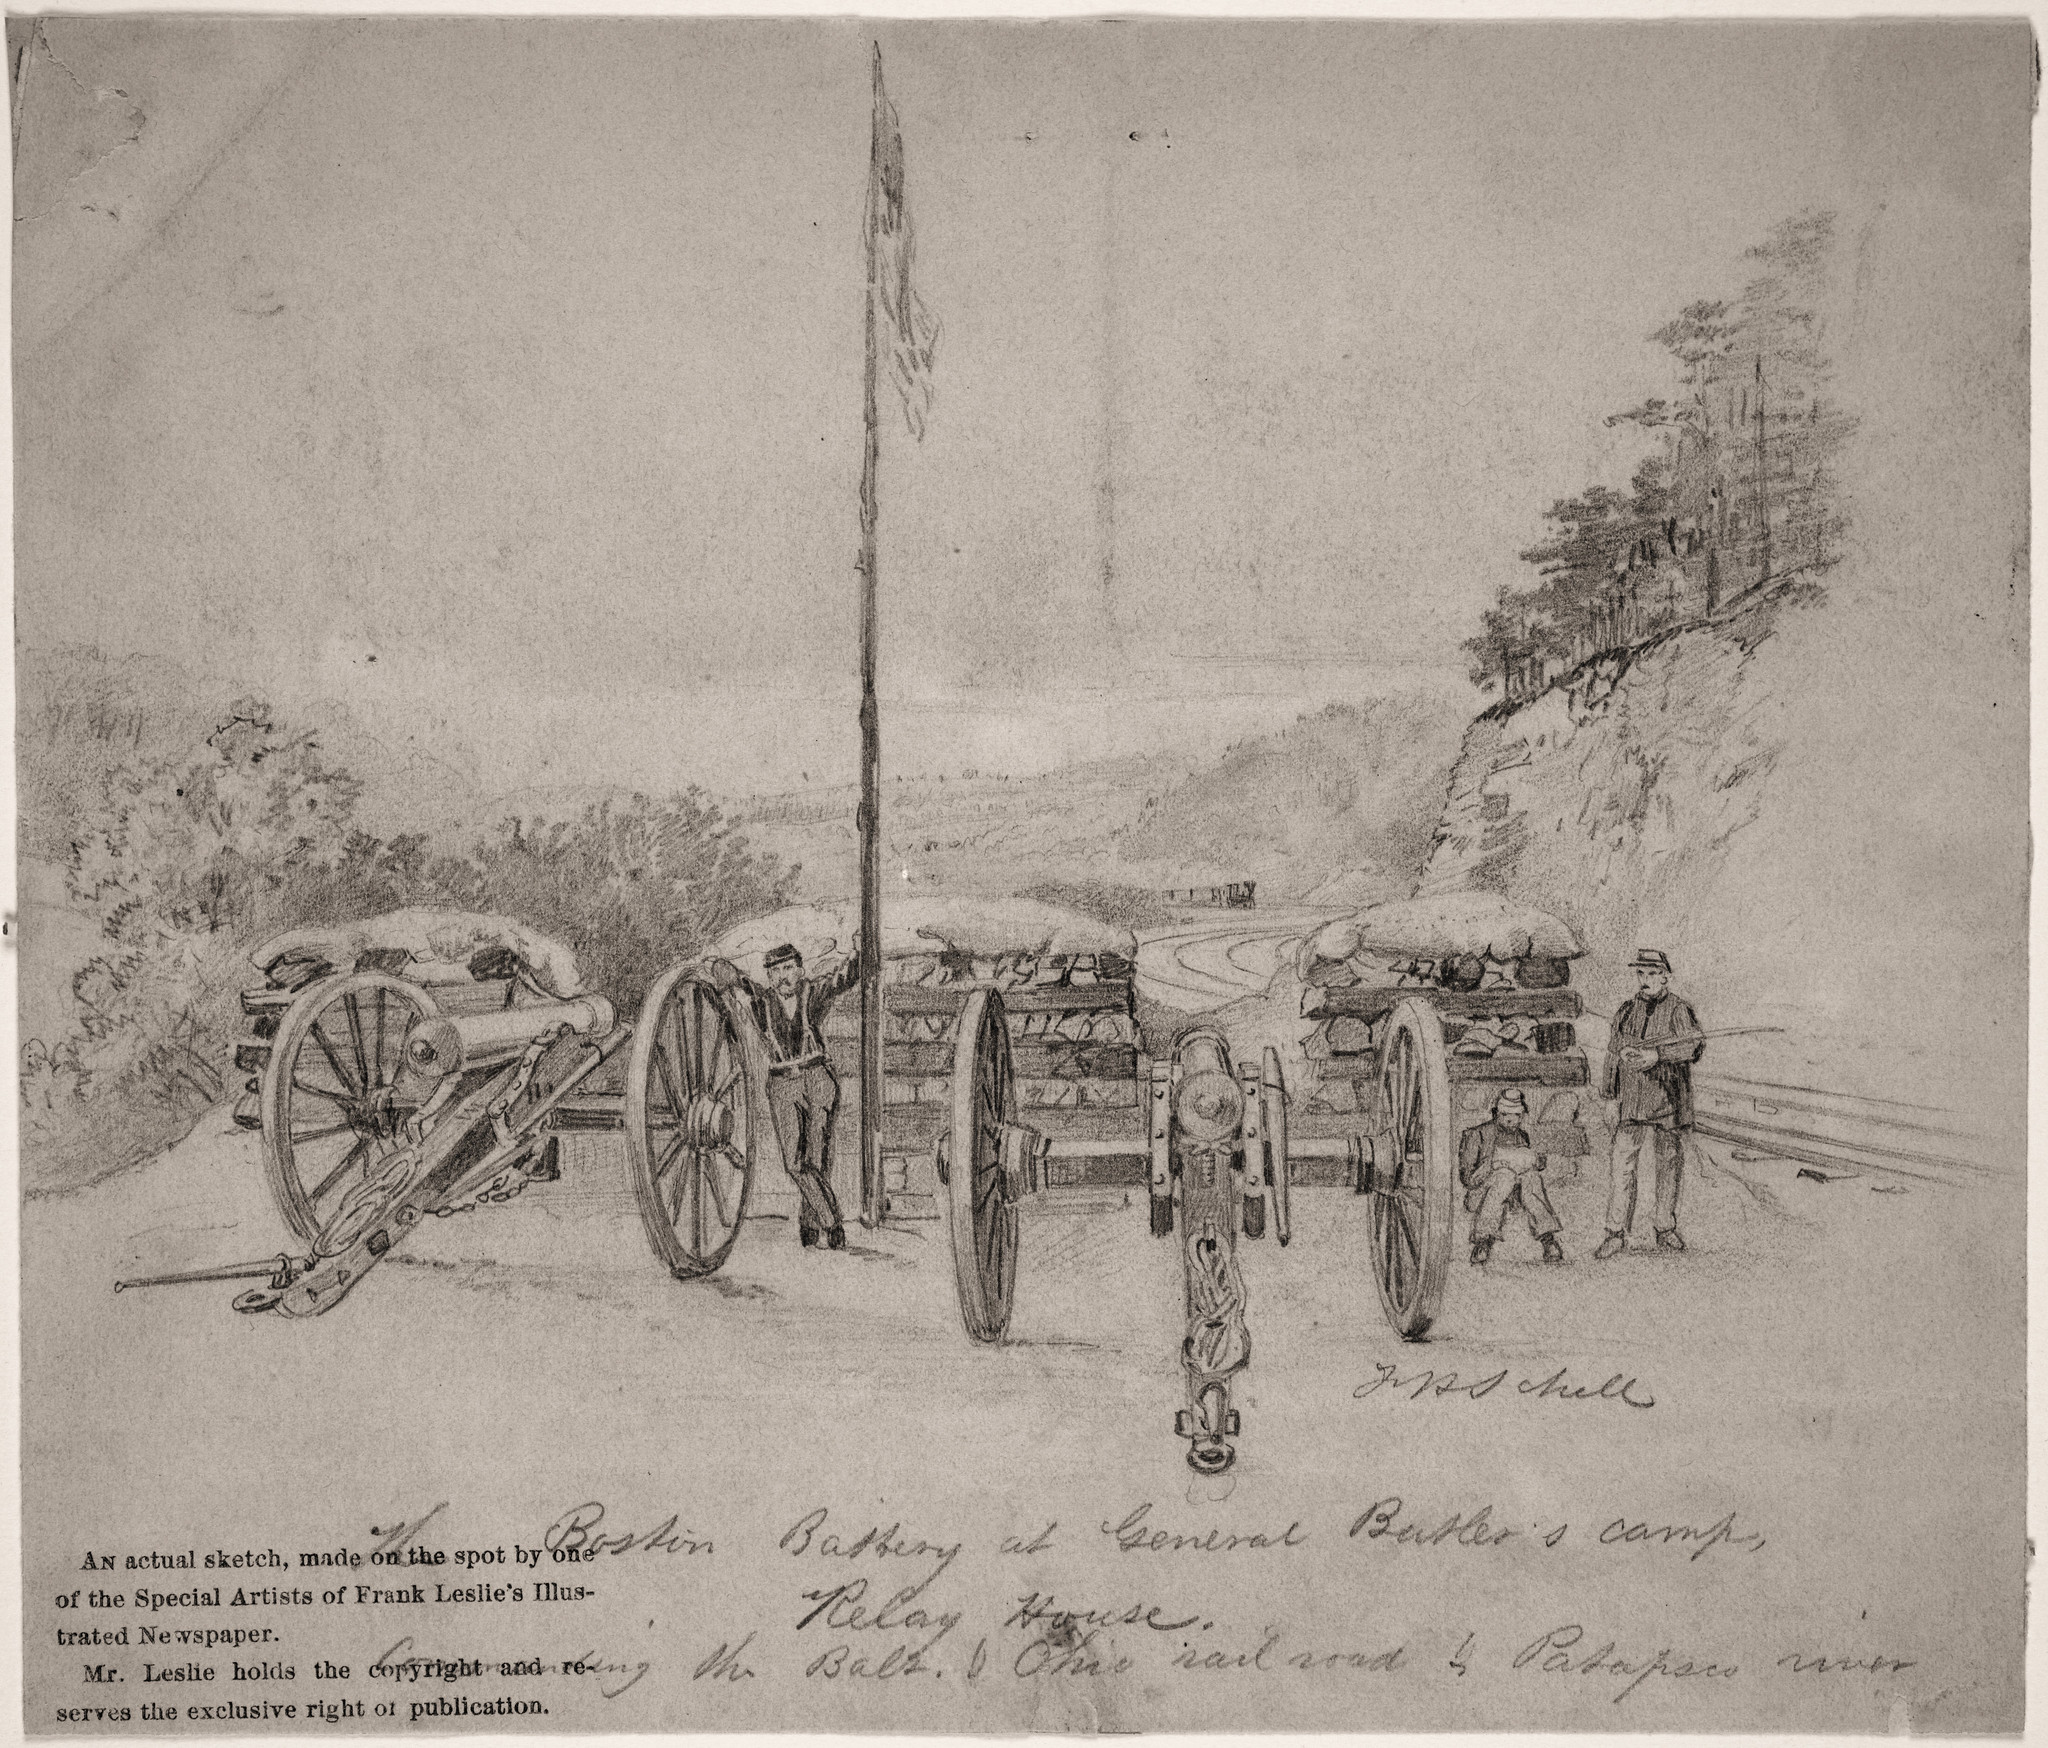 The Boston battery at General Butler's camps, Relay House. Commanding the Baltimore & Ohio Railroad by Patapsco River